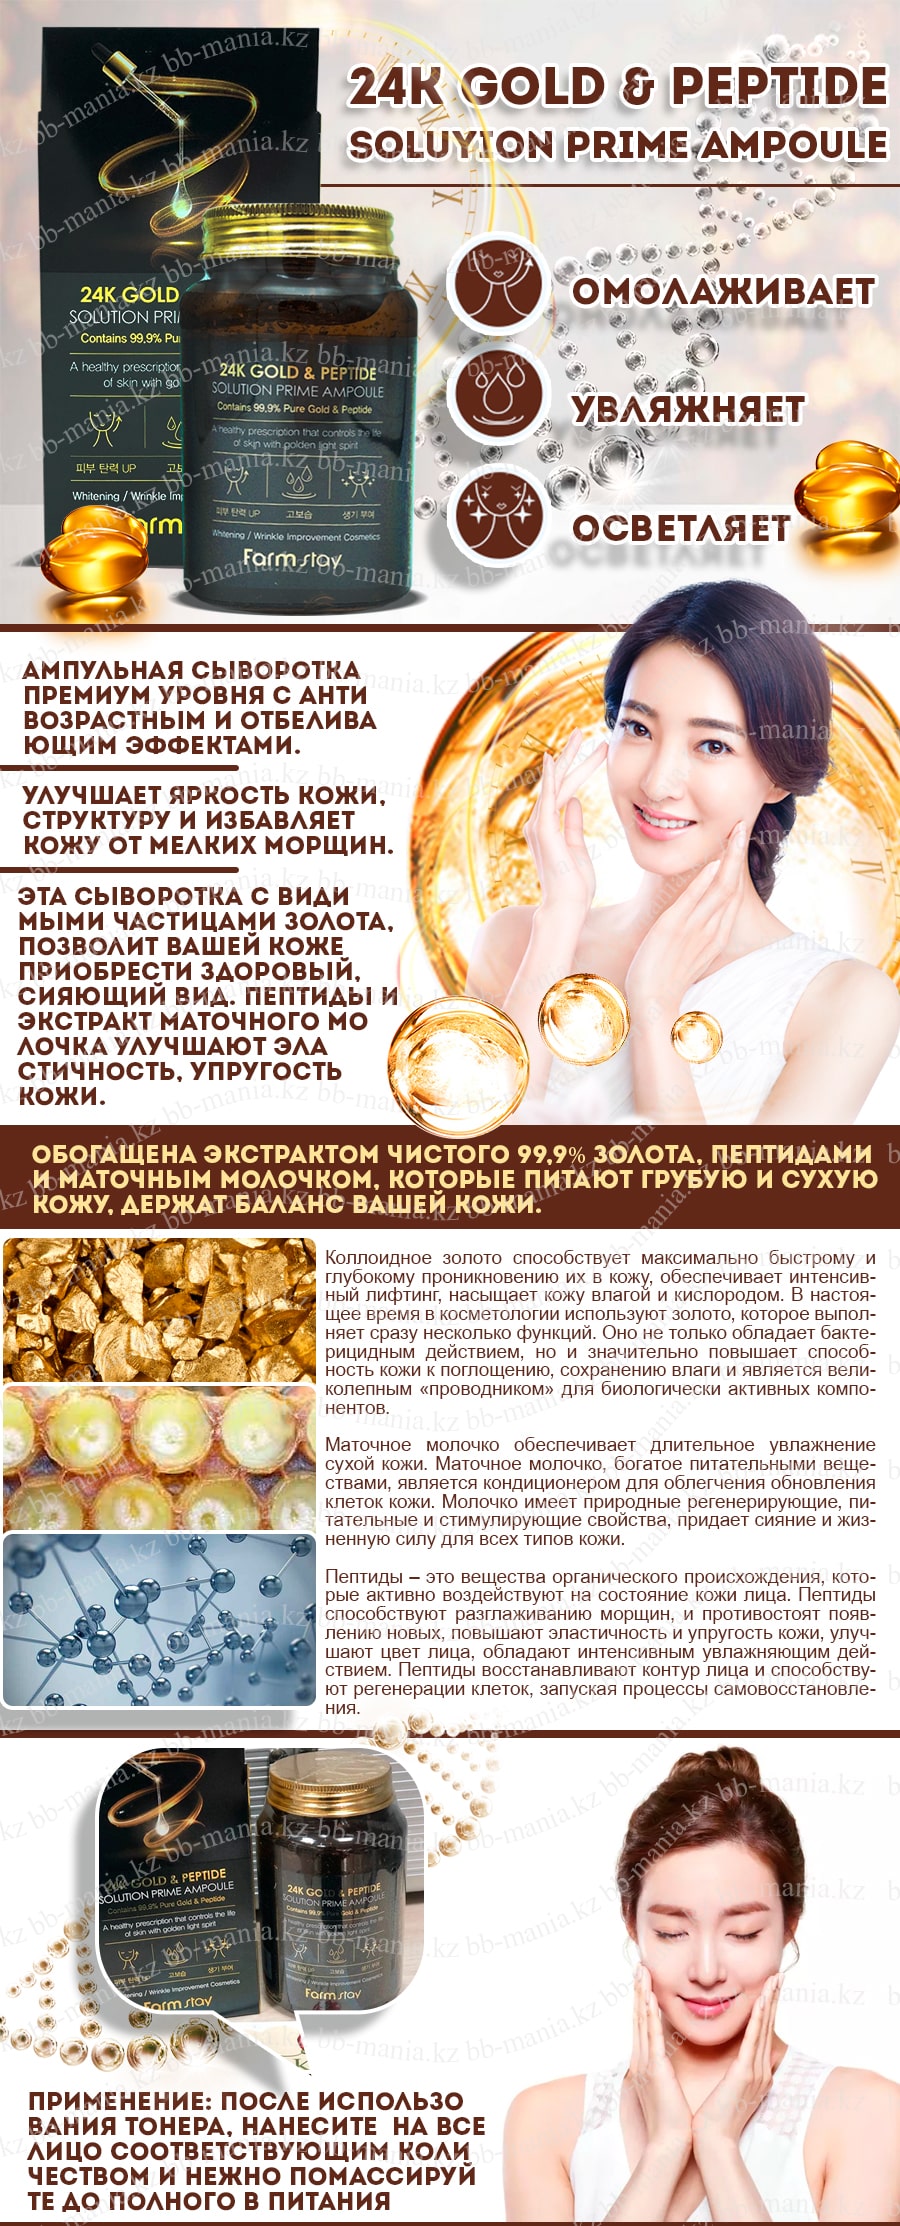 24K-Gold-&-Peptide-Soluyion-Prime-Ampoule-[FarmStay]-min